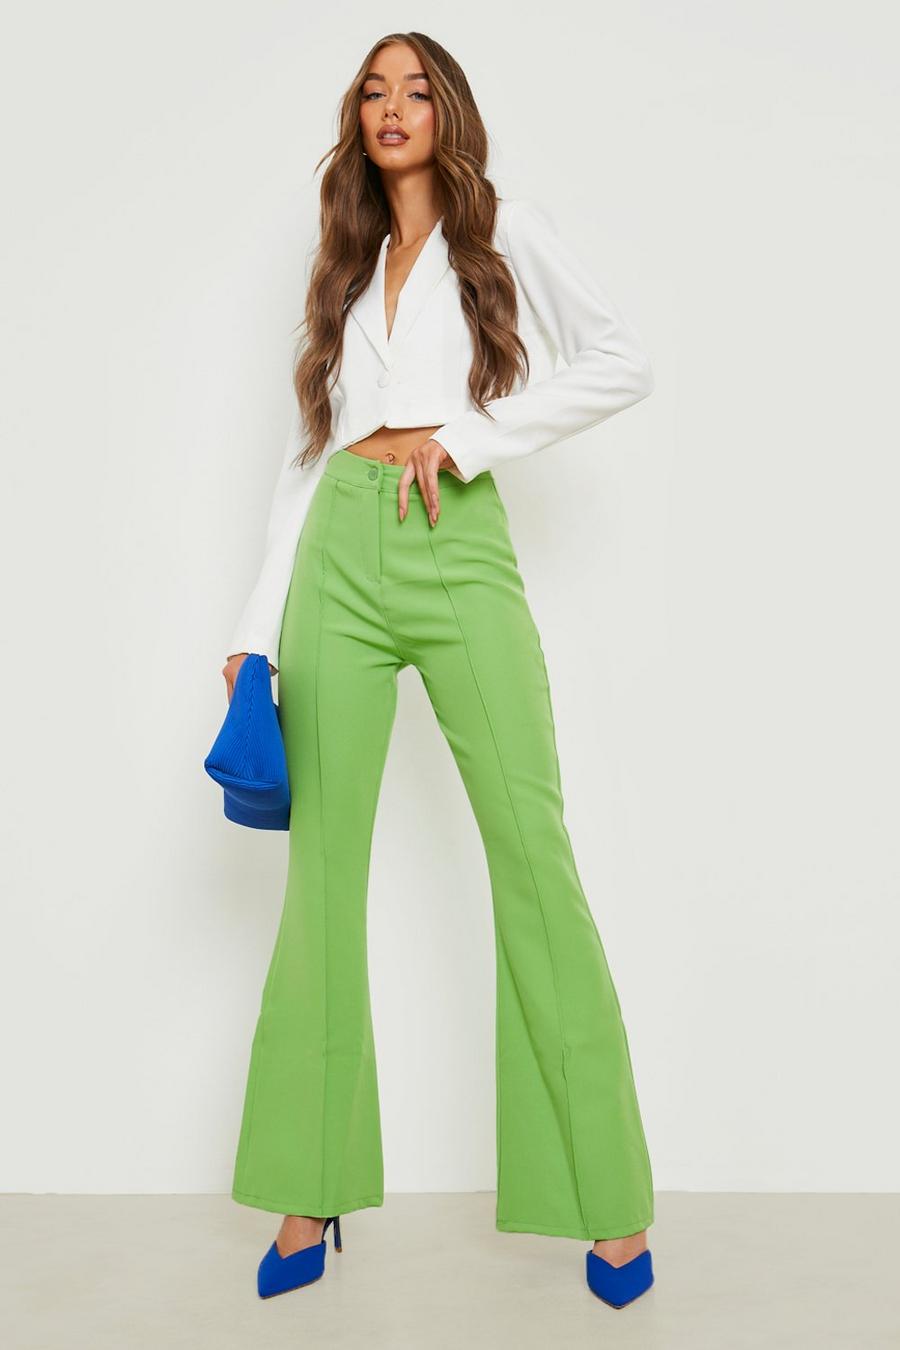 Women Flare Bell Bottom Dress Pants Long Flared Trousers Front Slit Stretchy